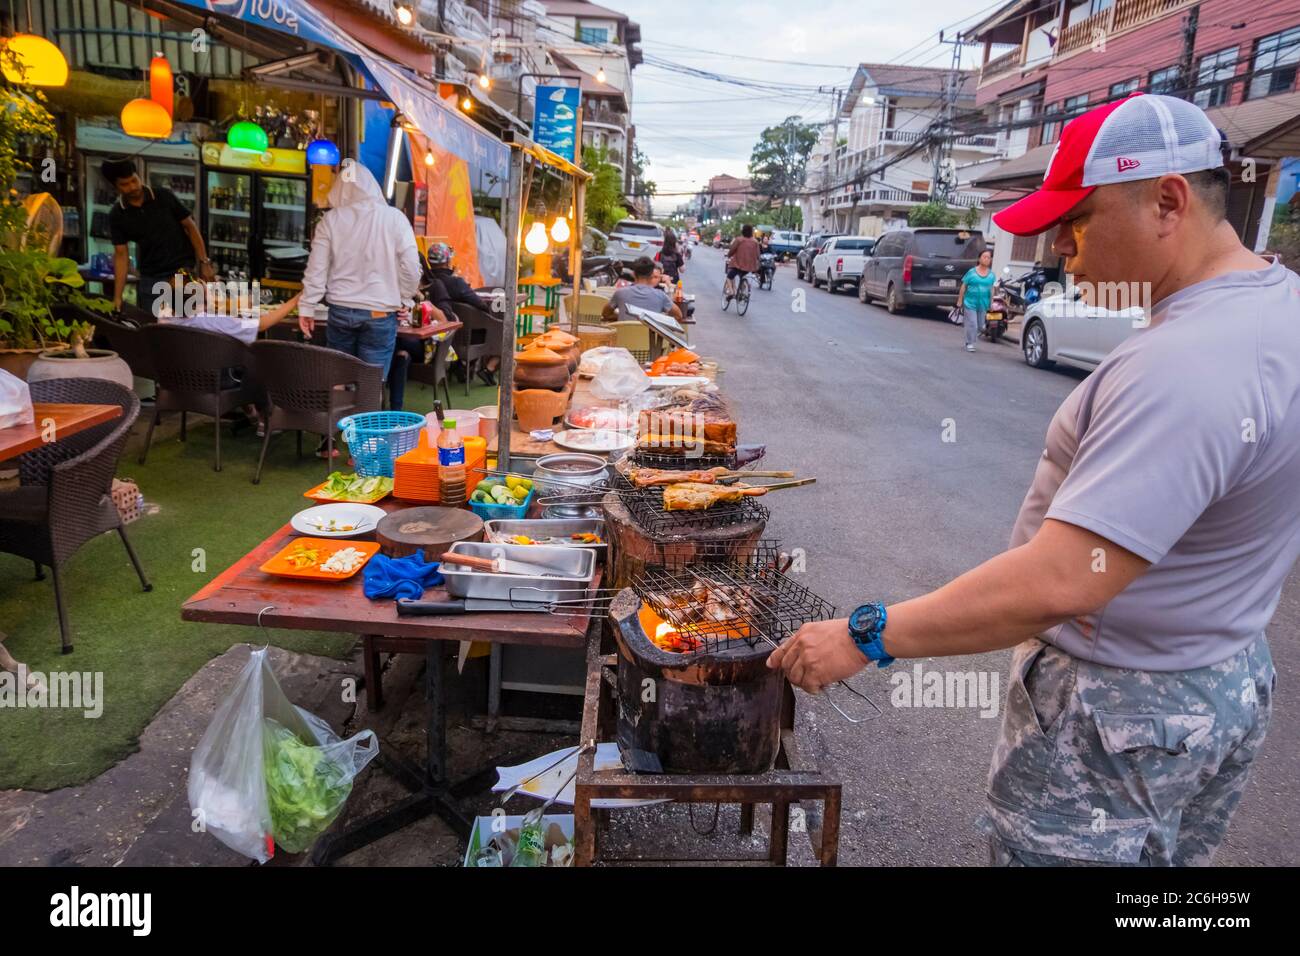 Grilling of fish and meat, Chao Anou Road, central Vientiane, Laos Stock Photo